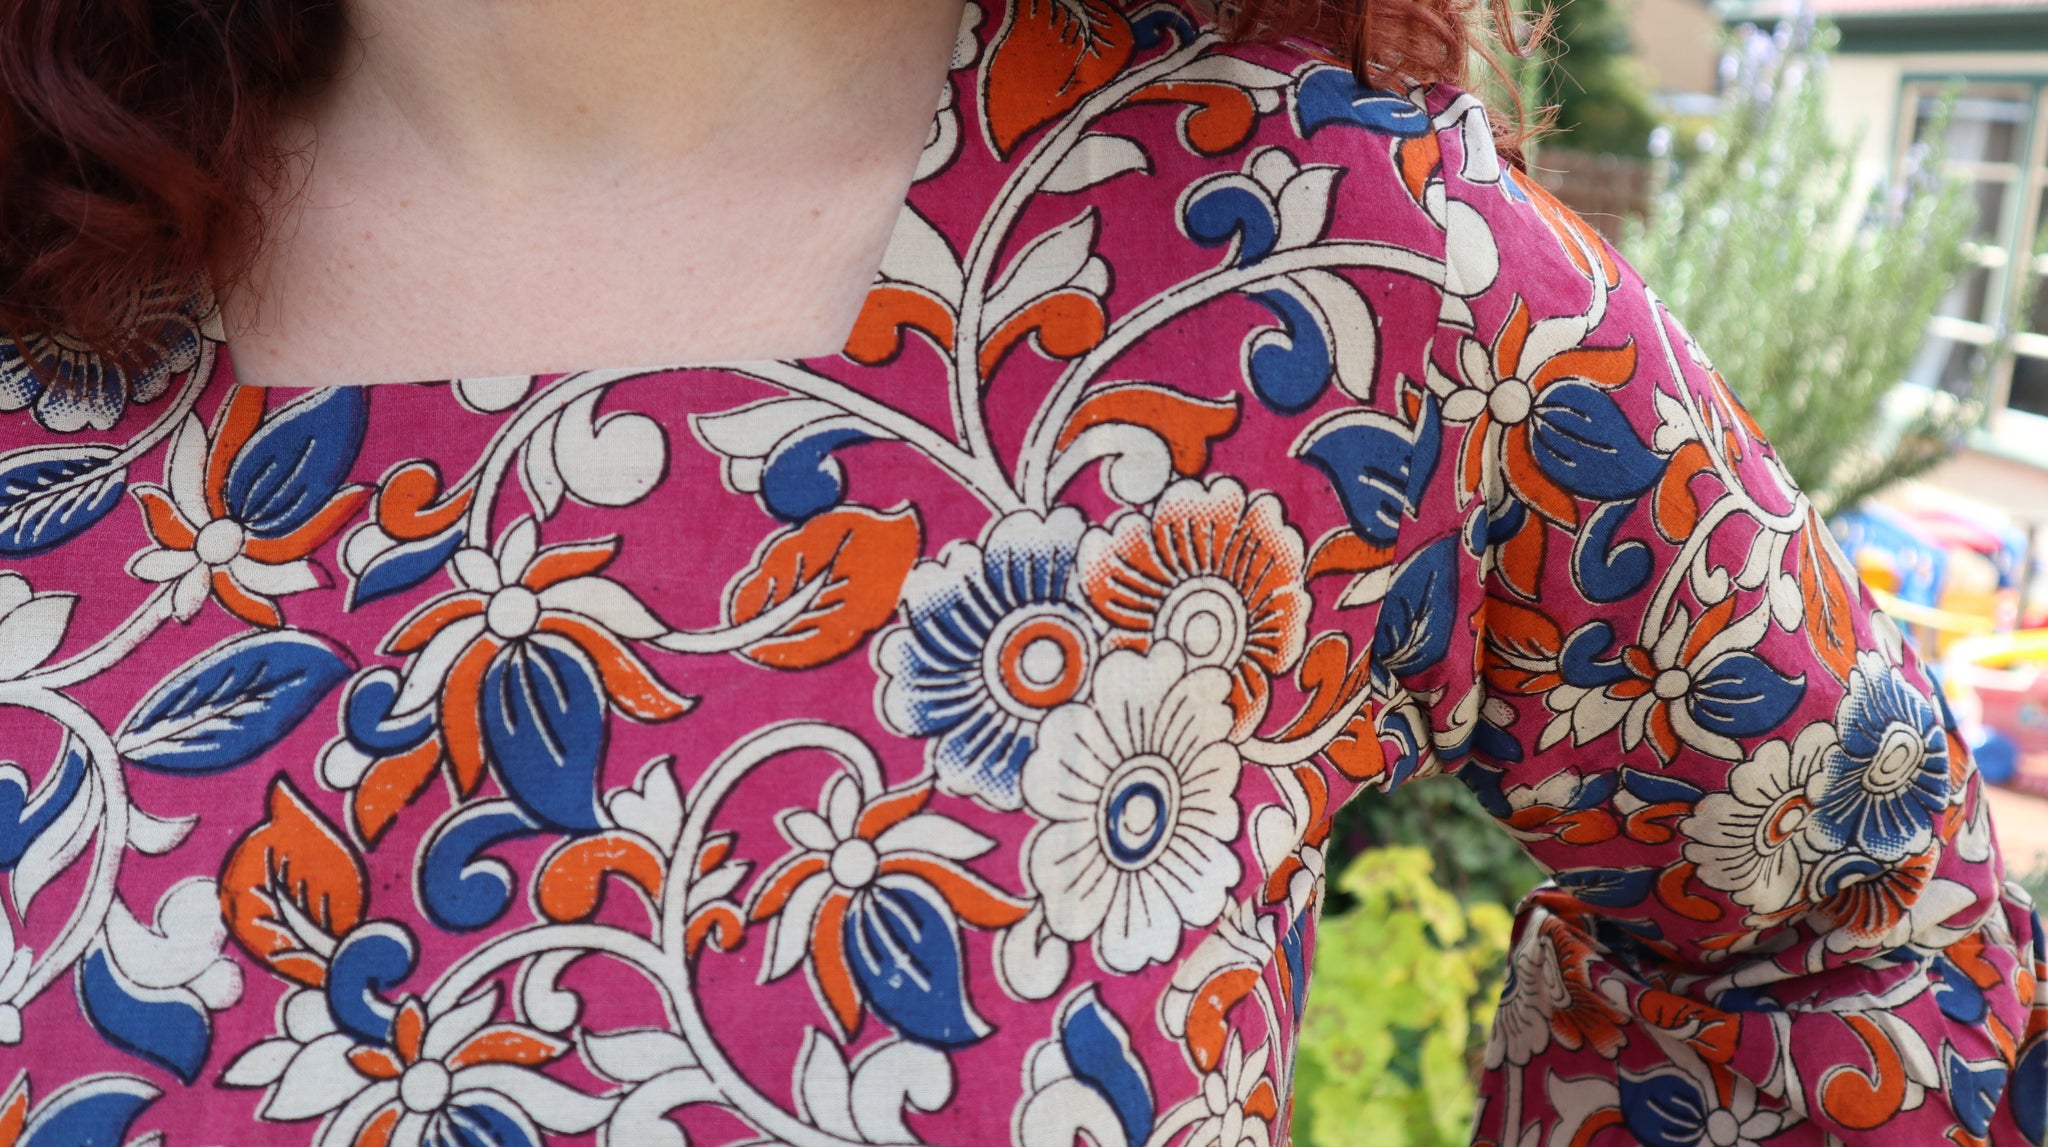 Fair trade ethical bell sleeve top with square neck, an orchid purple patterned design with traditional Indian Tanjore Art - vines with various flowers of blue and orange colours are displayed